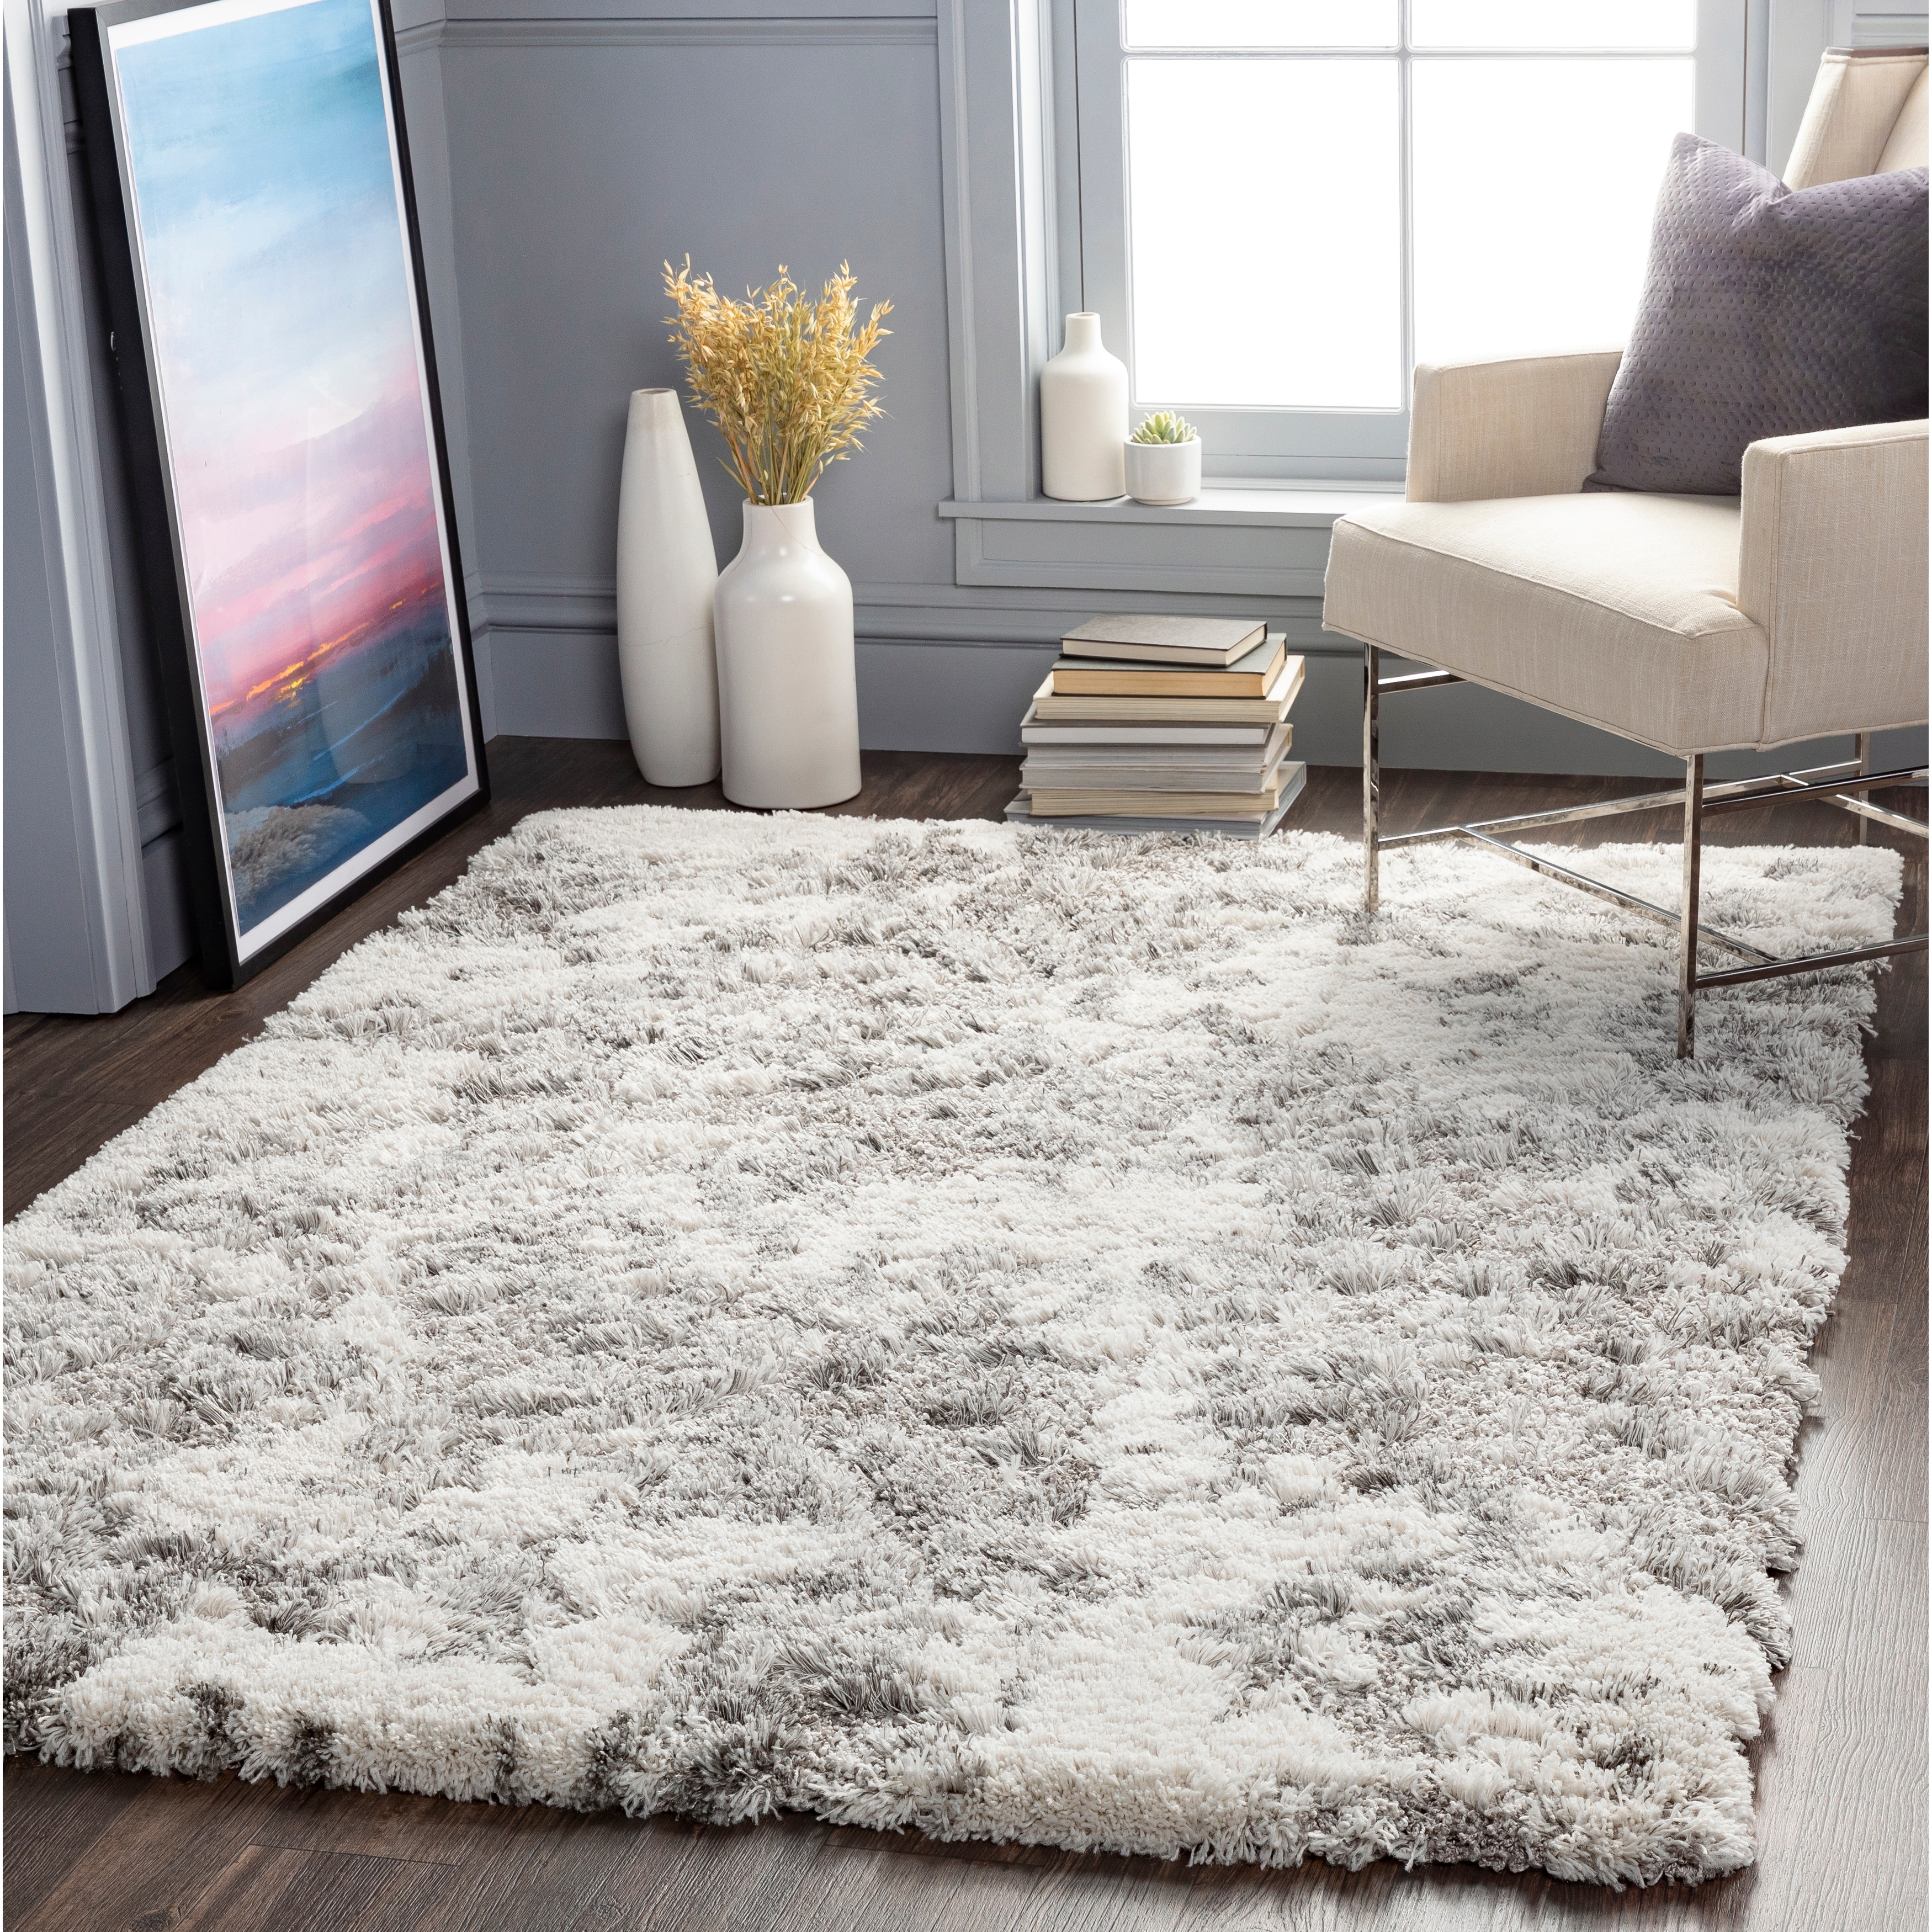 https://ak1.ostkcdn.com/images/products/is/images/direct/caf5fa41654b0dfa9f5c633c6213dca97327bc18/Kyler-Modern-Abstract-Shag-Area-Rug.jpg